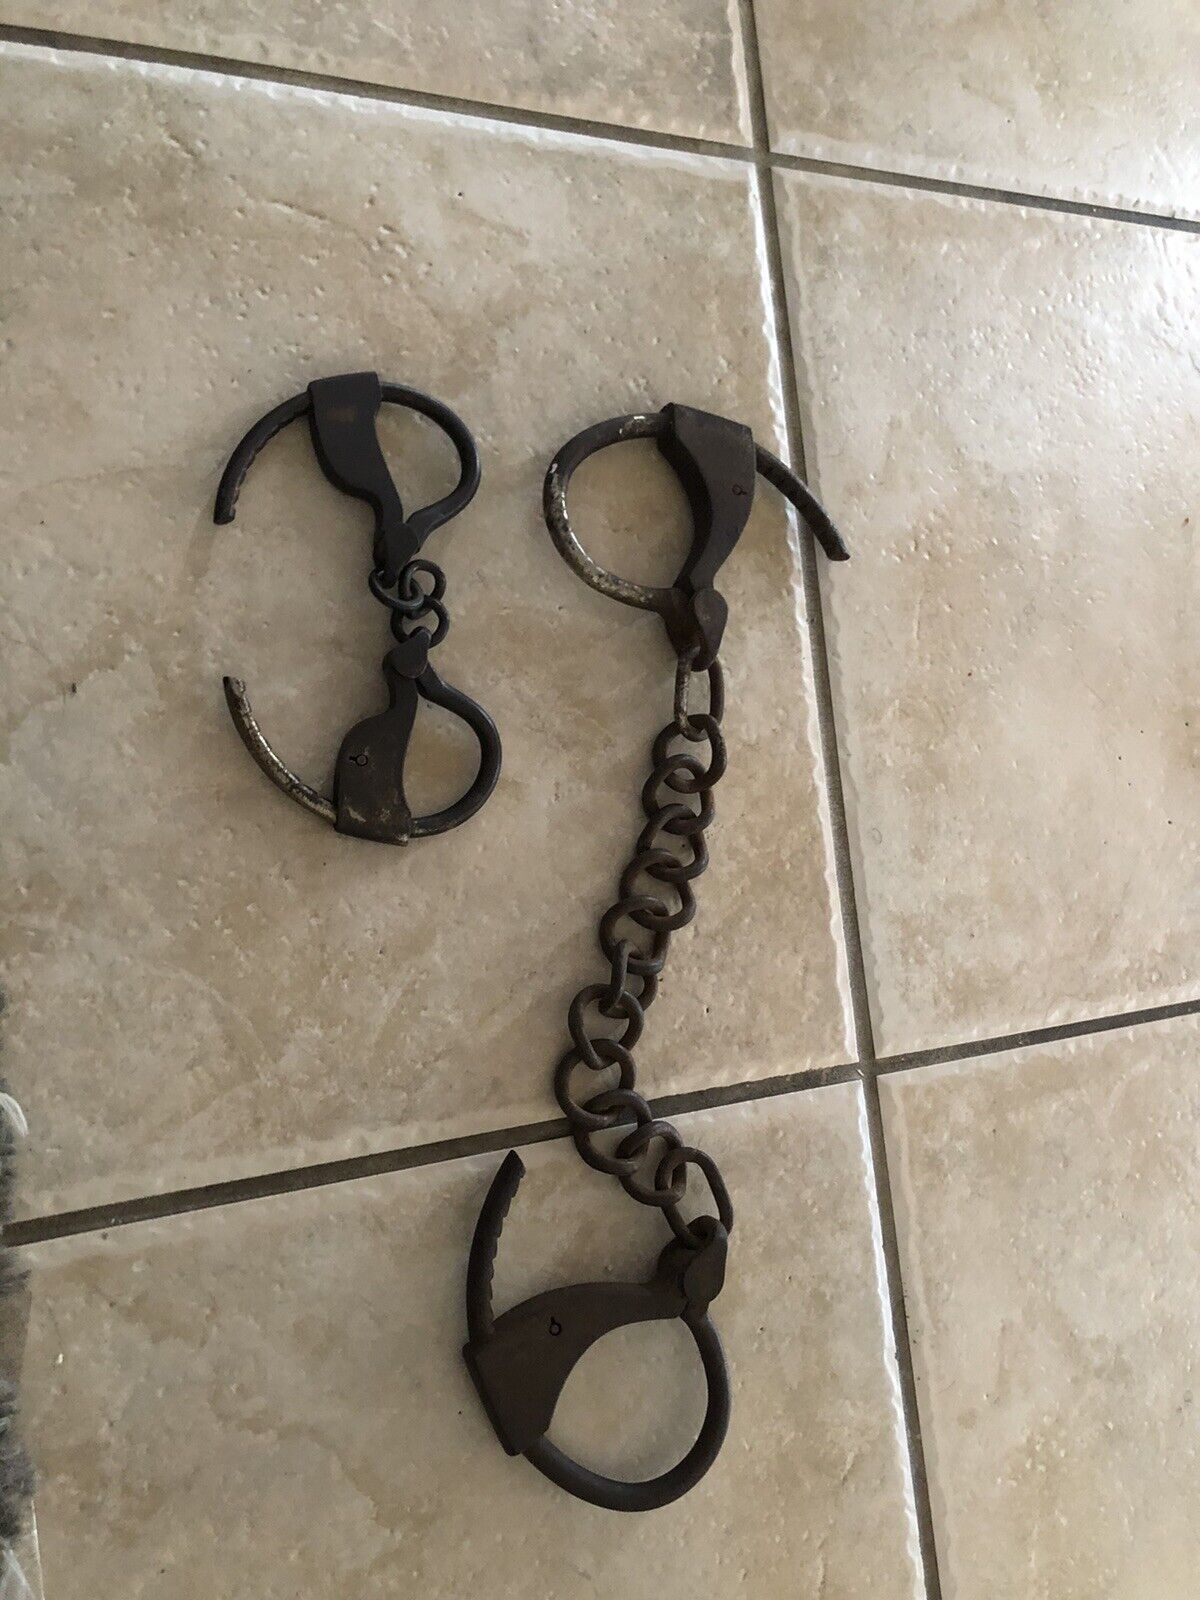 ANTIQUE OLD WROUGHT IRON LEGs & Hands CUFFS ANKLE PRISONER SHACKLES CHAIN